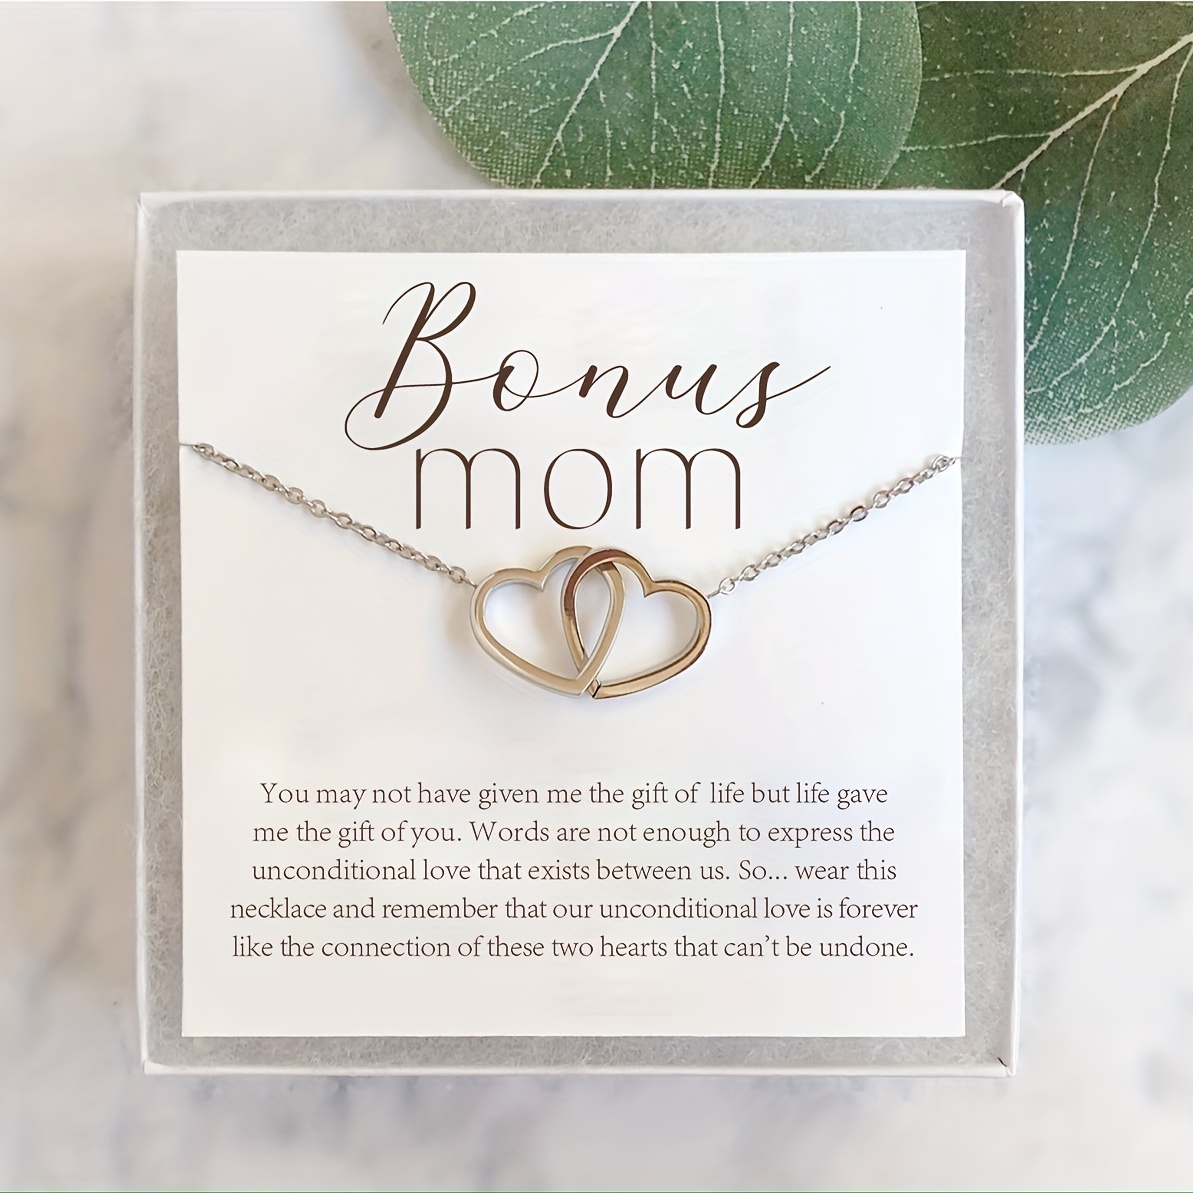 Gifts for Second Mom, Bonus Mom Gifts, Unbiological Mom Gifts, Gift Ideas for Someone Like A Mom, Step Mom Gift, Bonus Mom Necklace Silver - Black